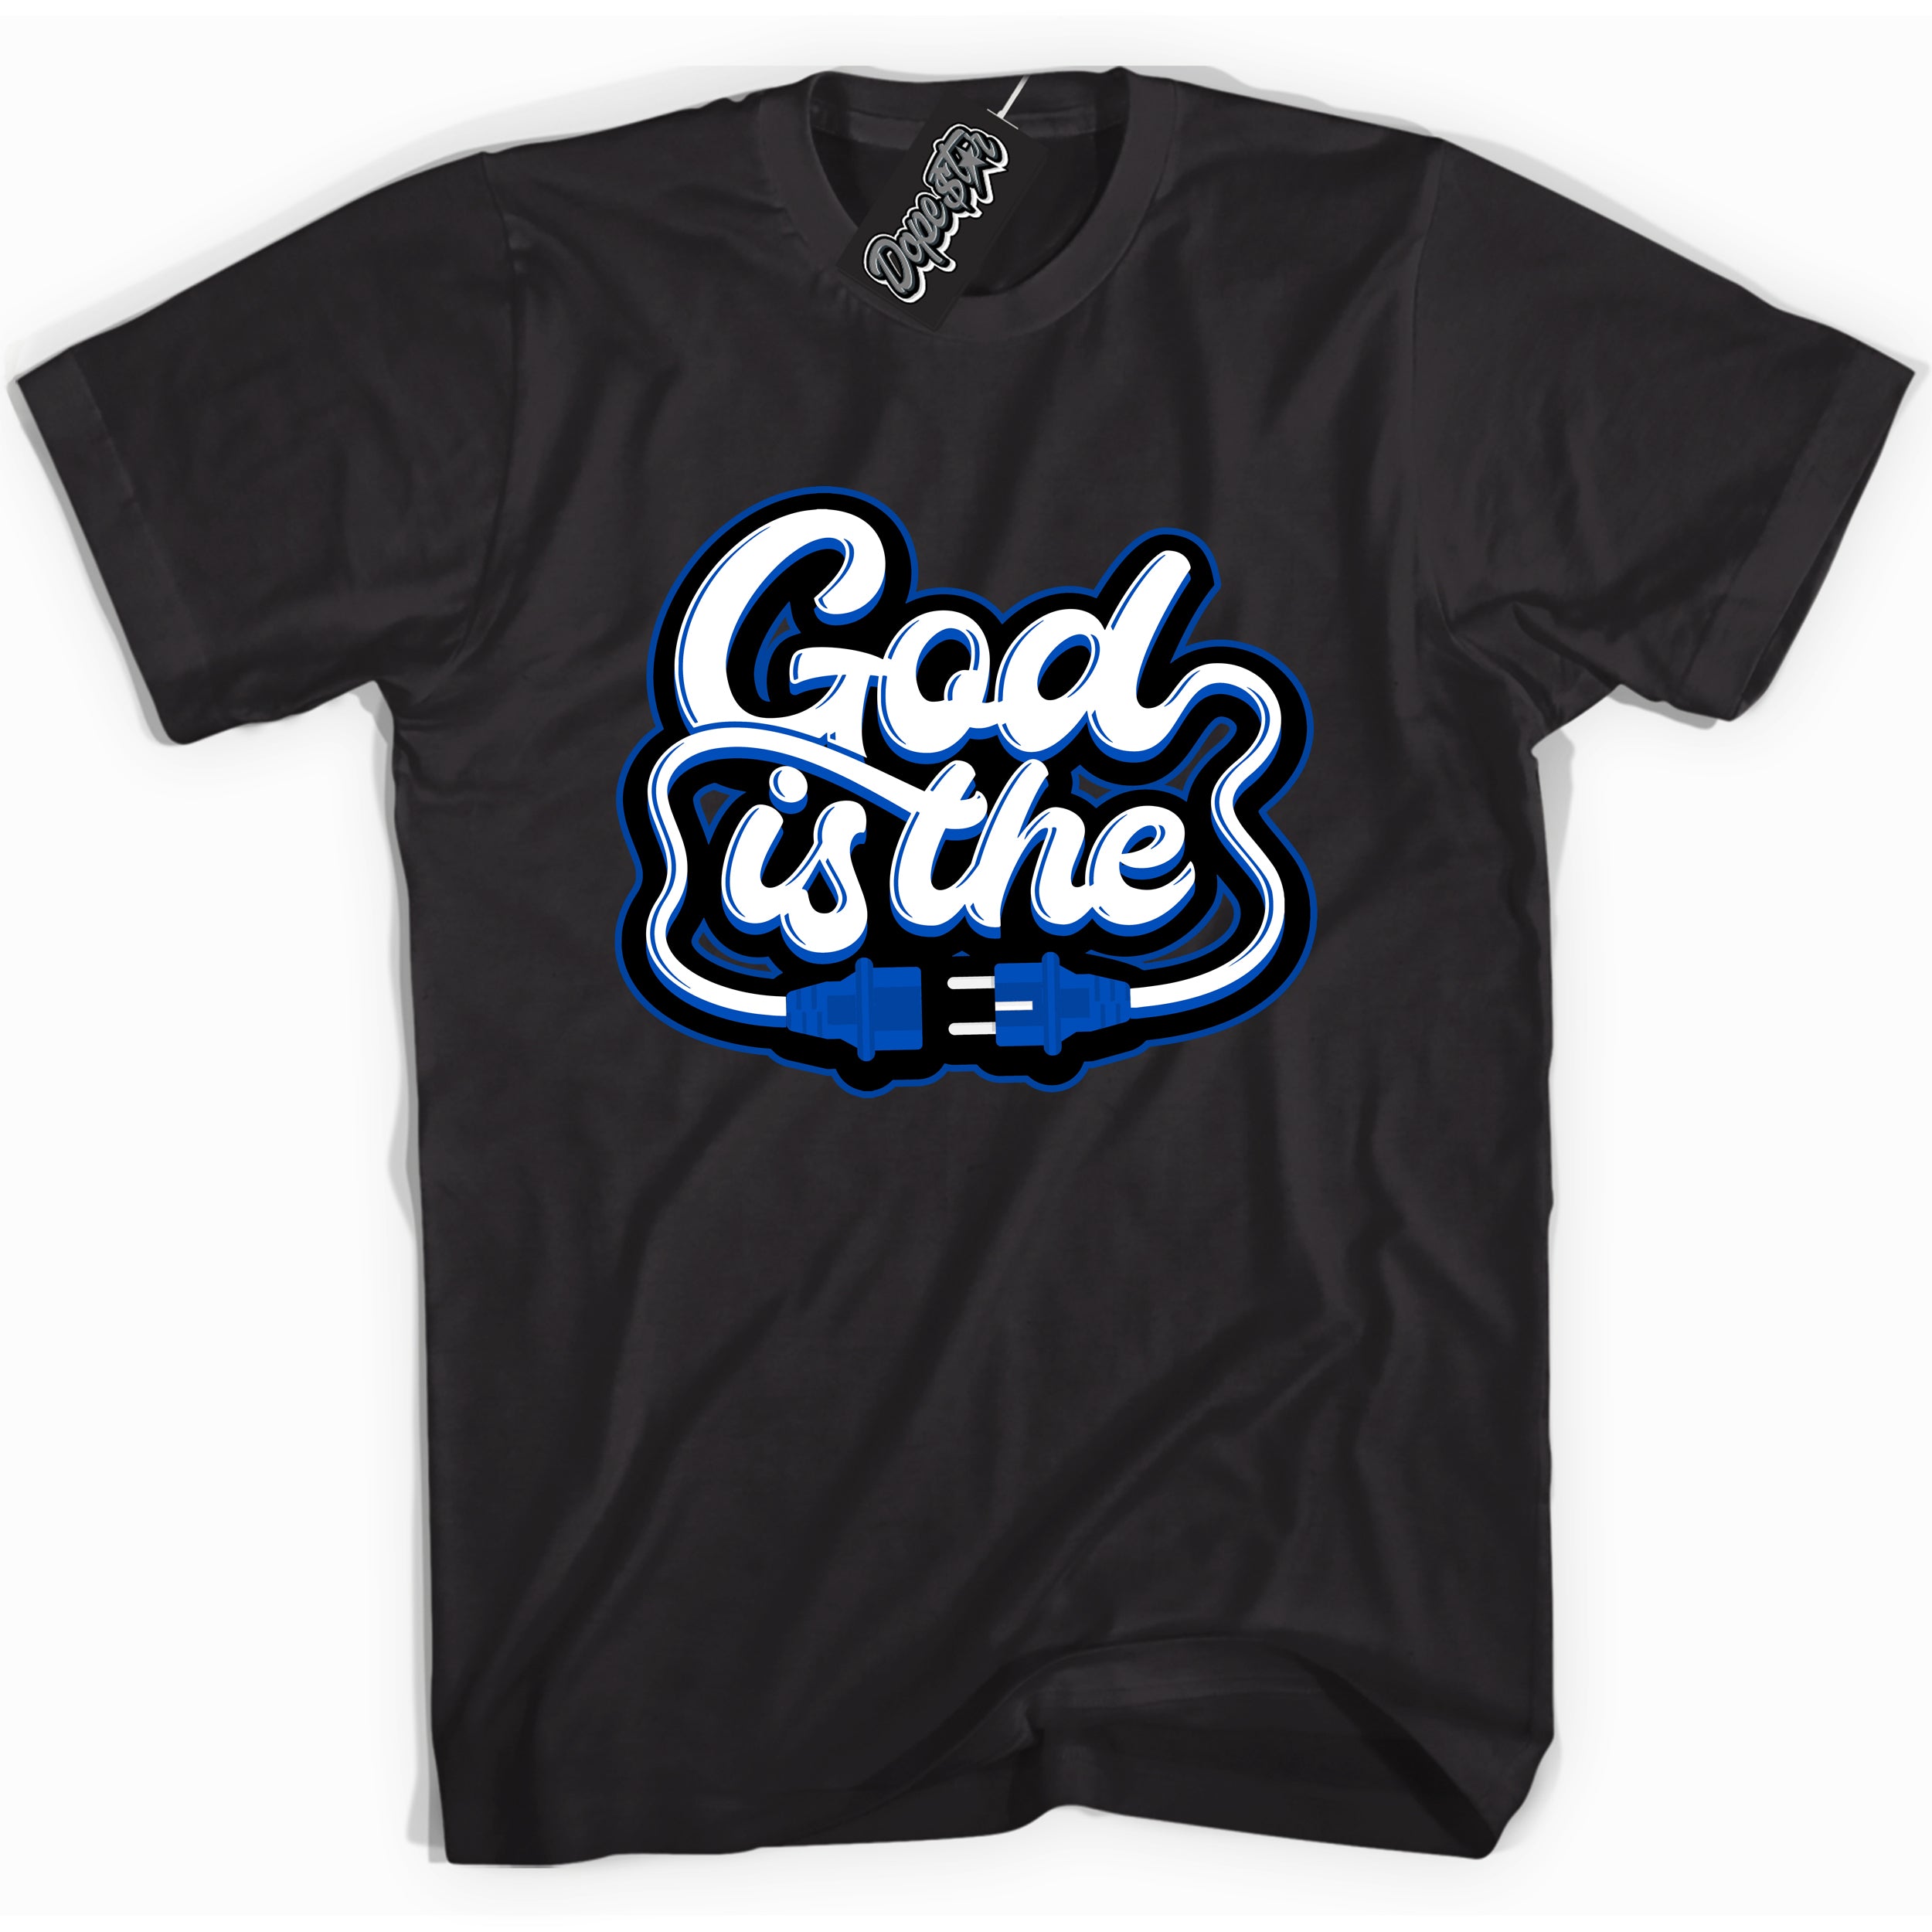 Cool Black graphic tee with God Is The print, that perfectly matches OG Royal Reimagined 1s sneakers 